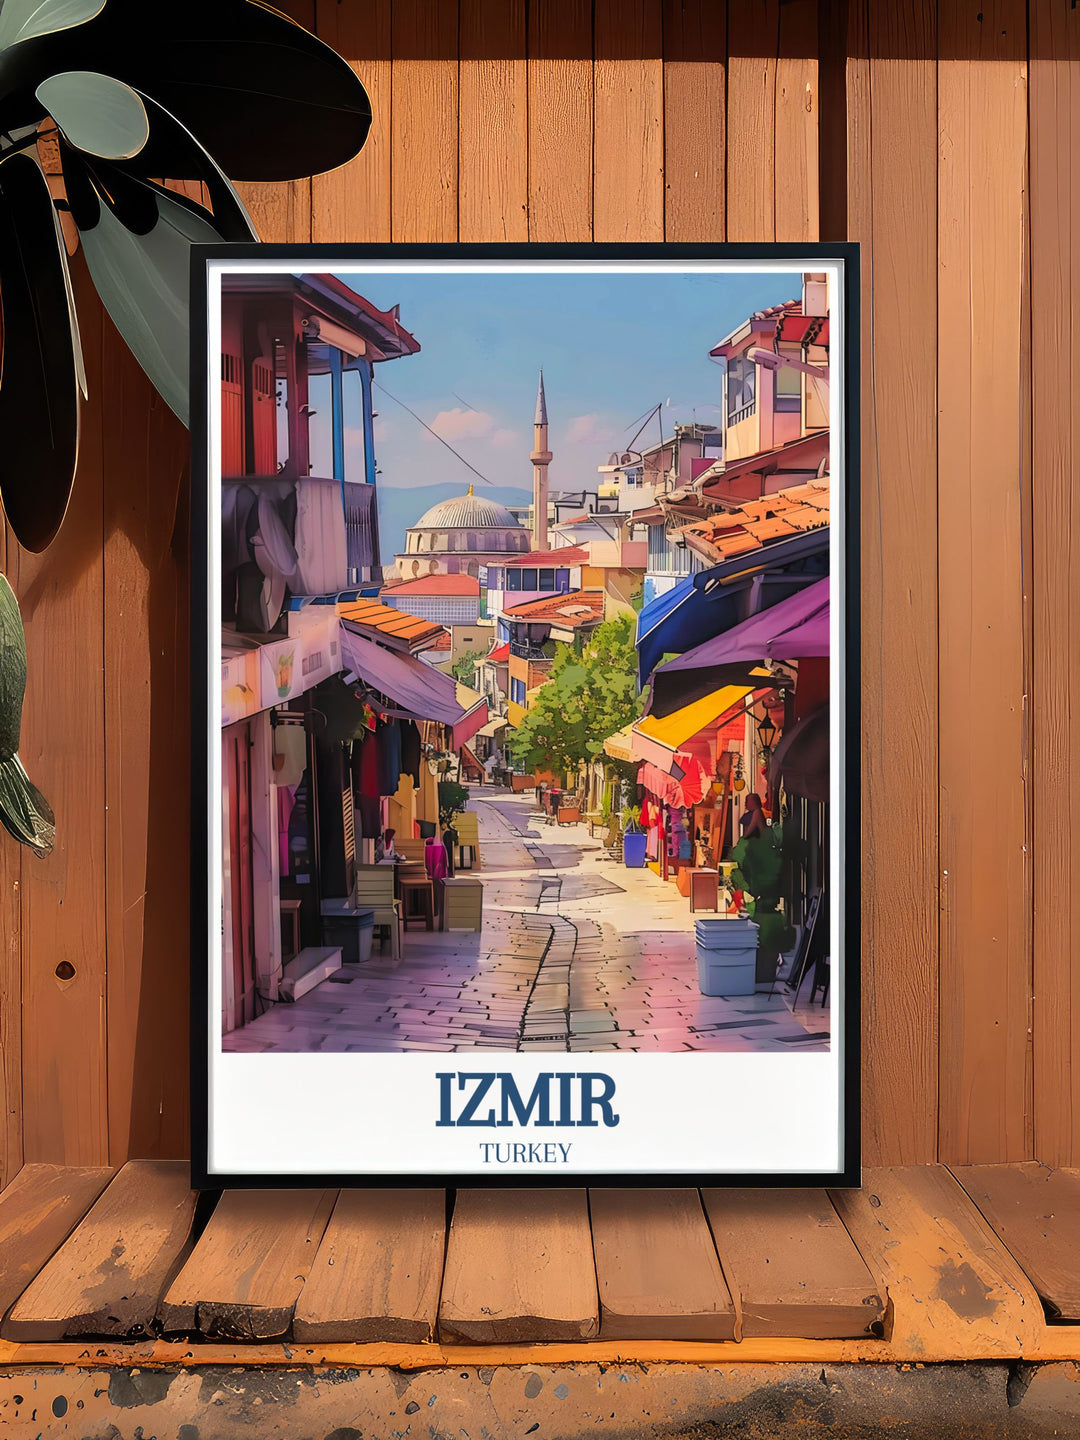 This art print showcases Izmirs Kemeralti Bazaar and Başdurak Mosque, bringing the timeless beauty and cultural significance of these landmarks into your home.